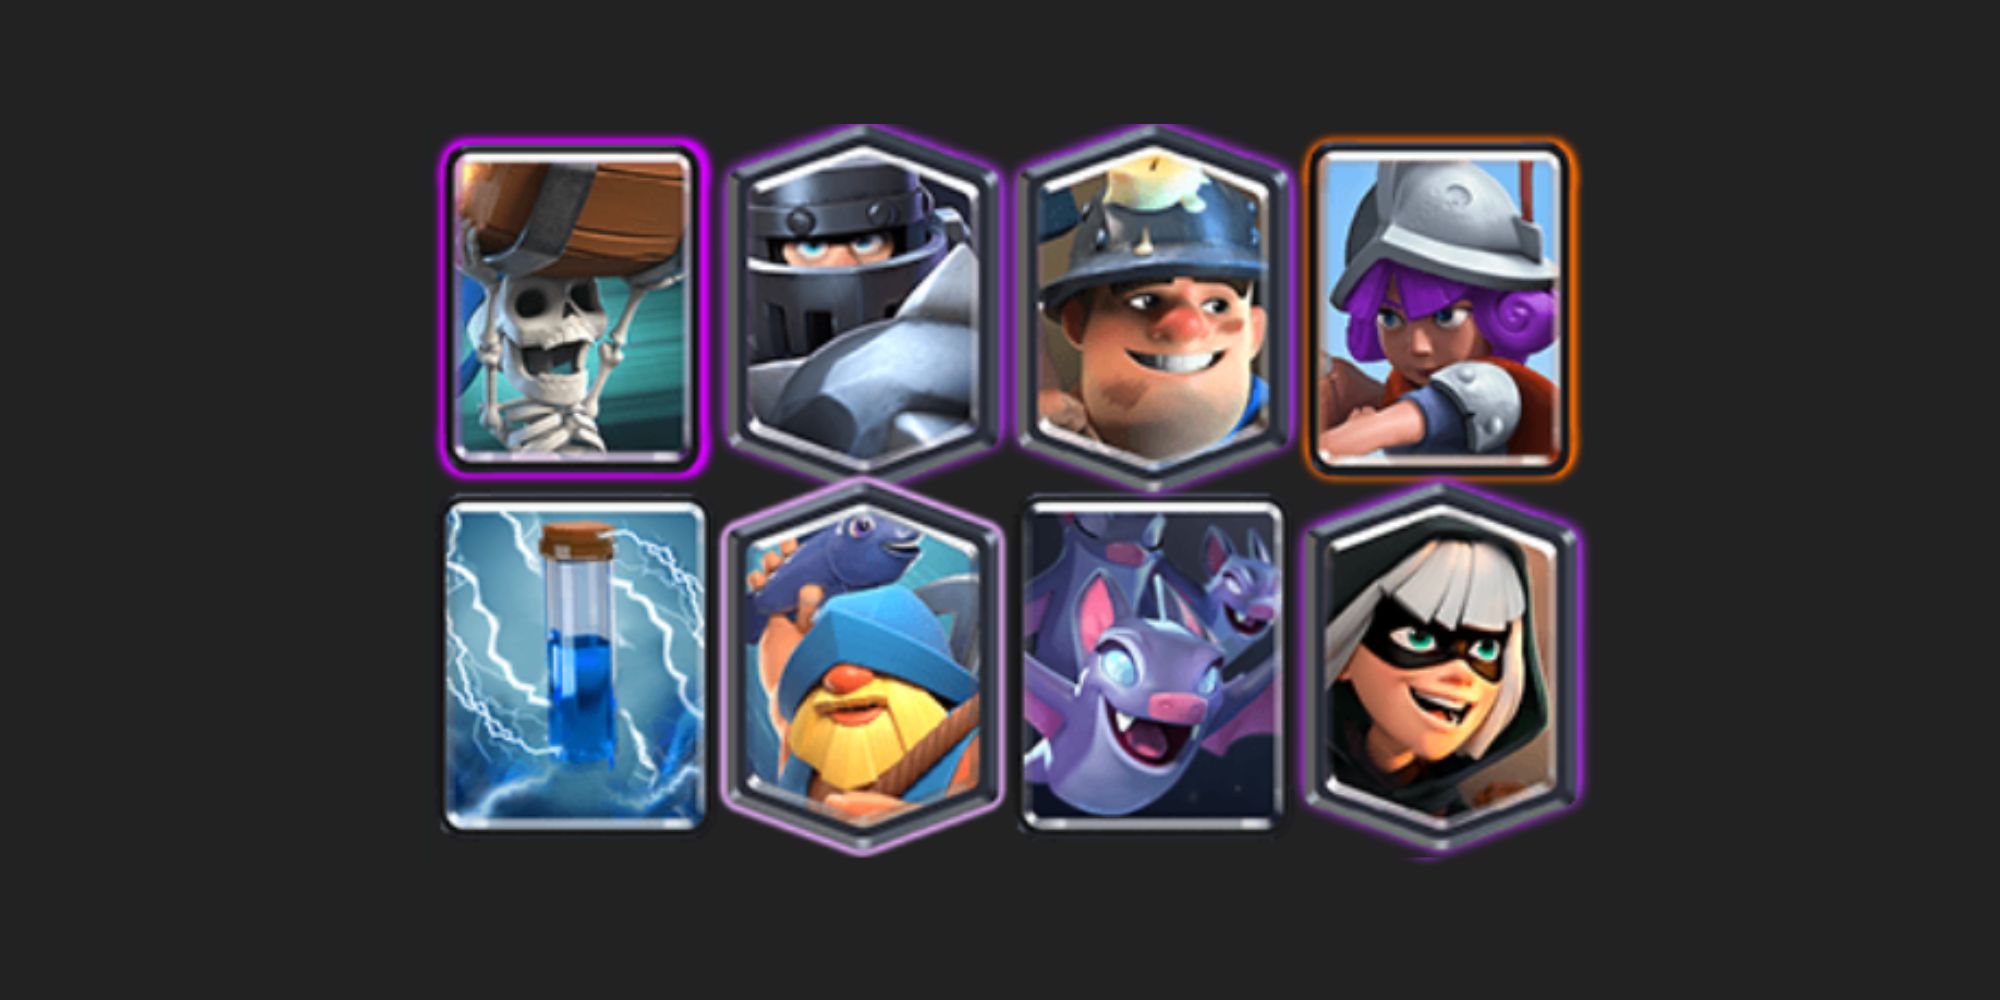 The Mega Knight Wall breakers deck in Clash Royale